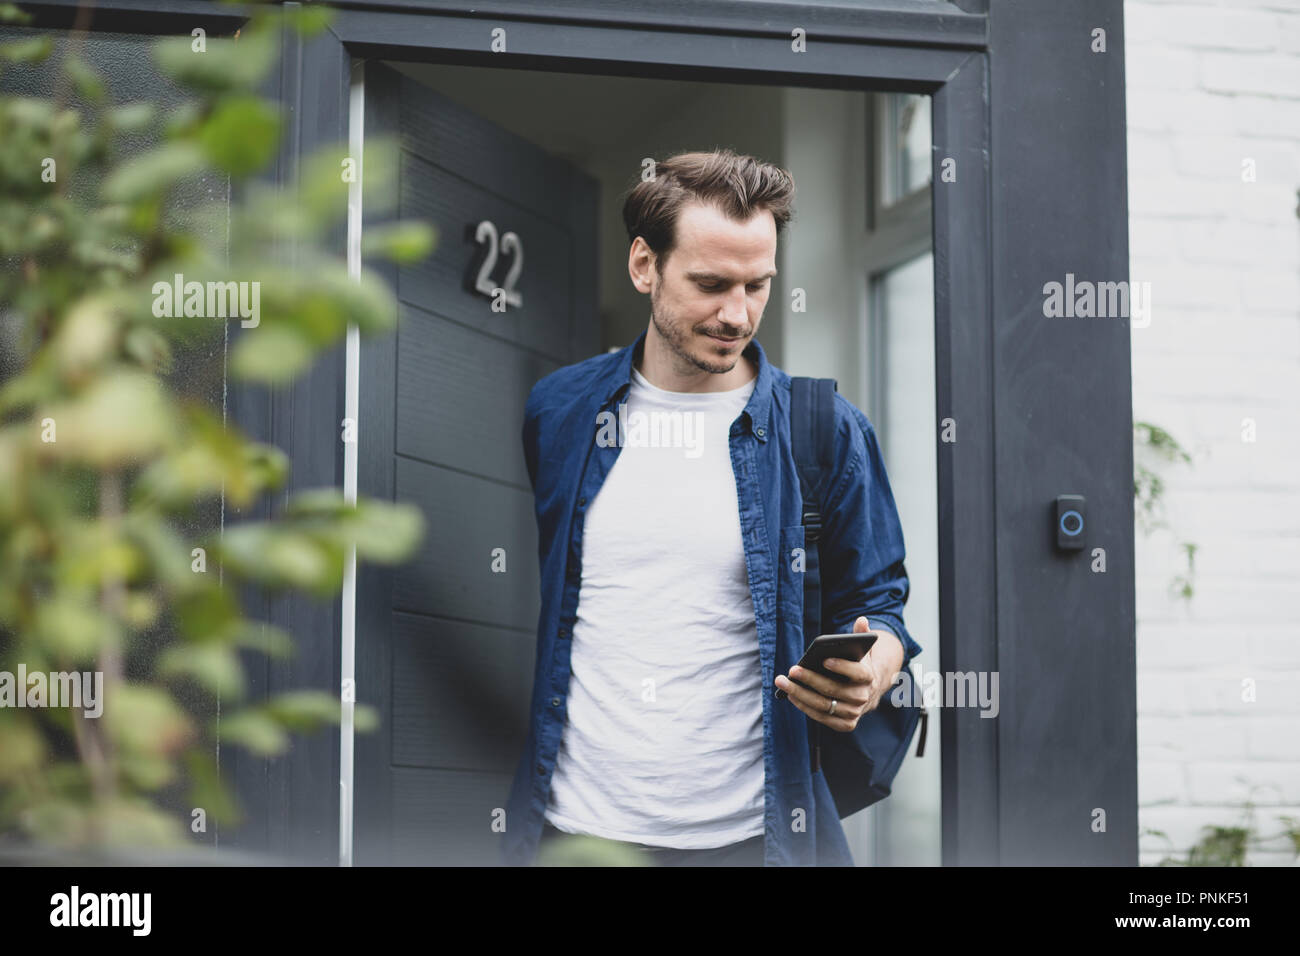 Adult male leaving the house and checking smartphone Stock Photo